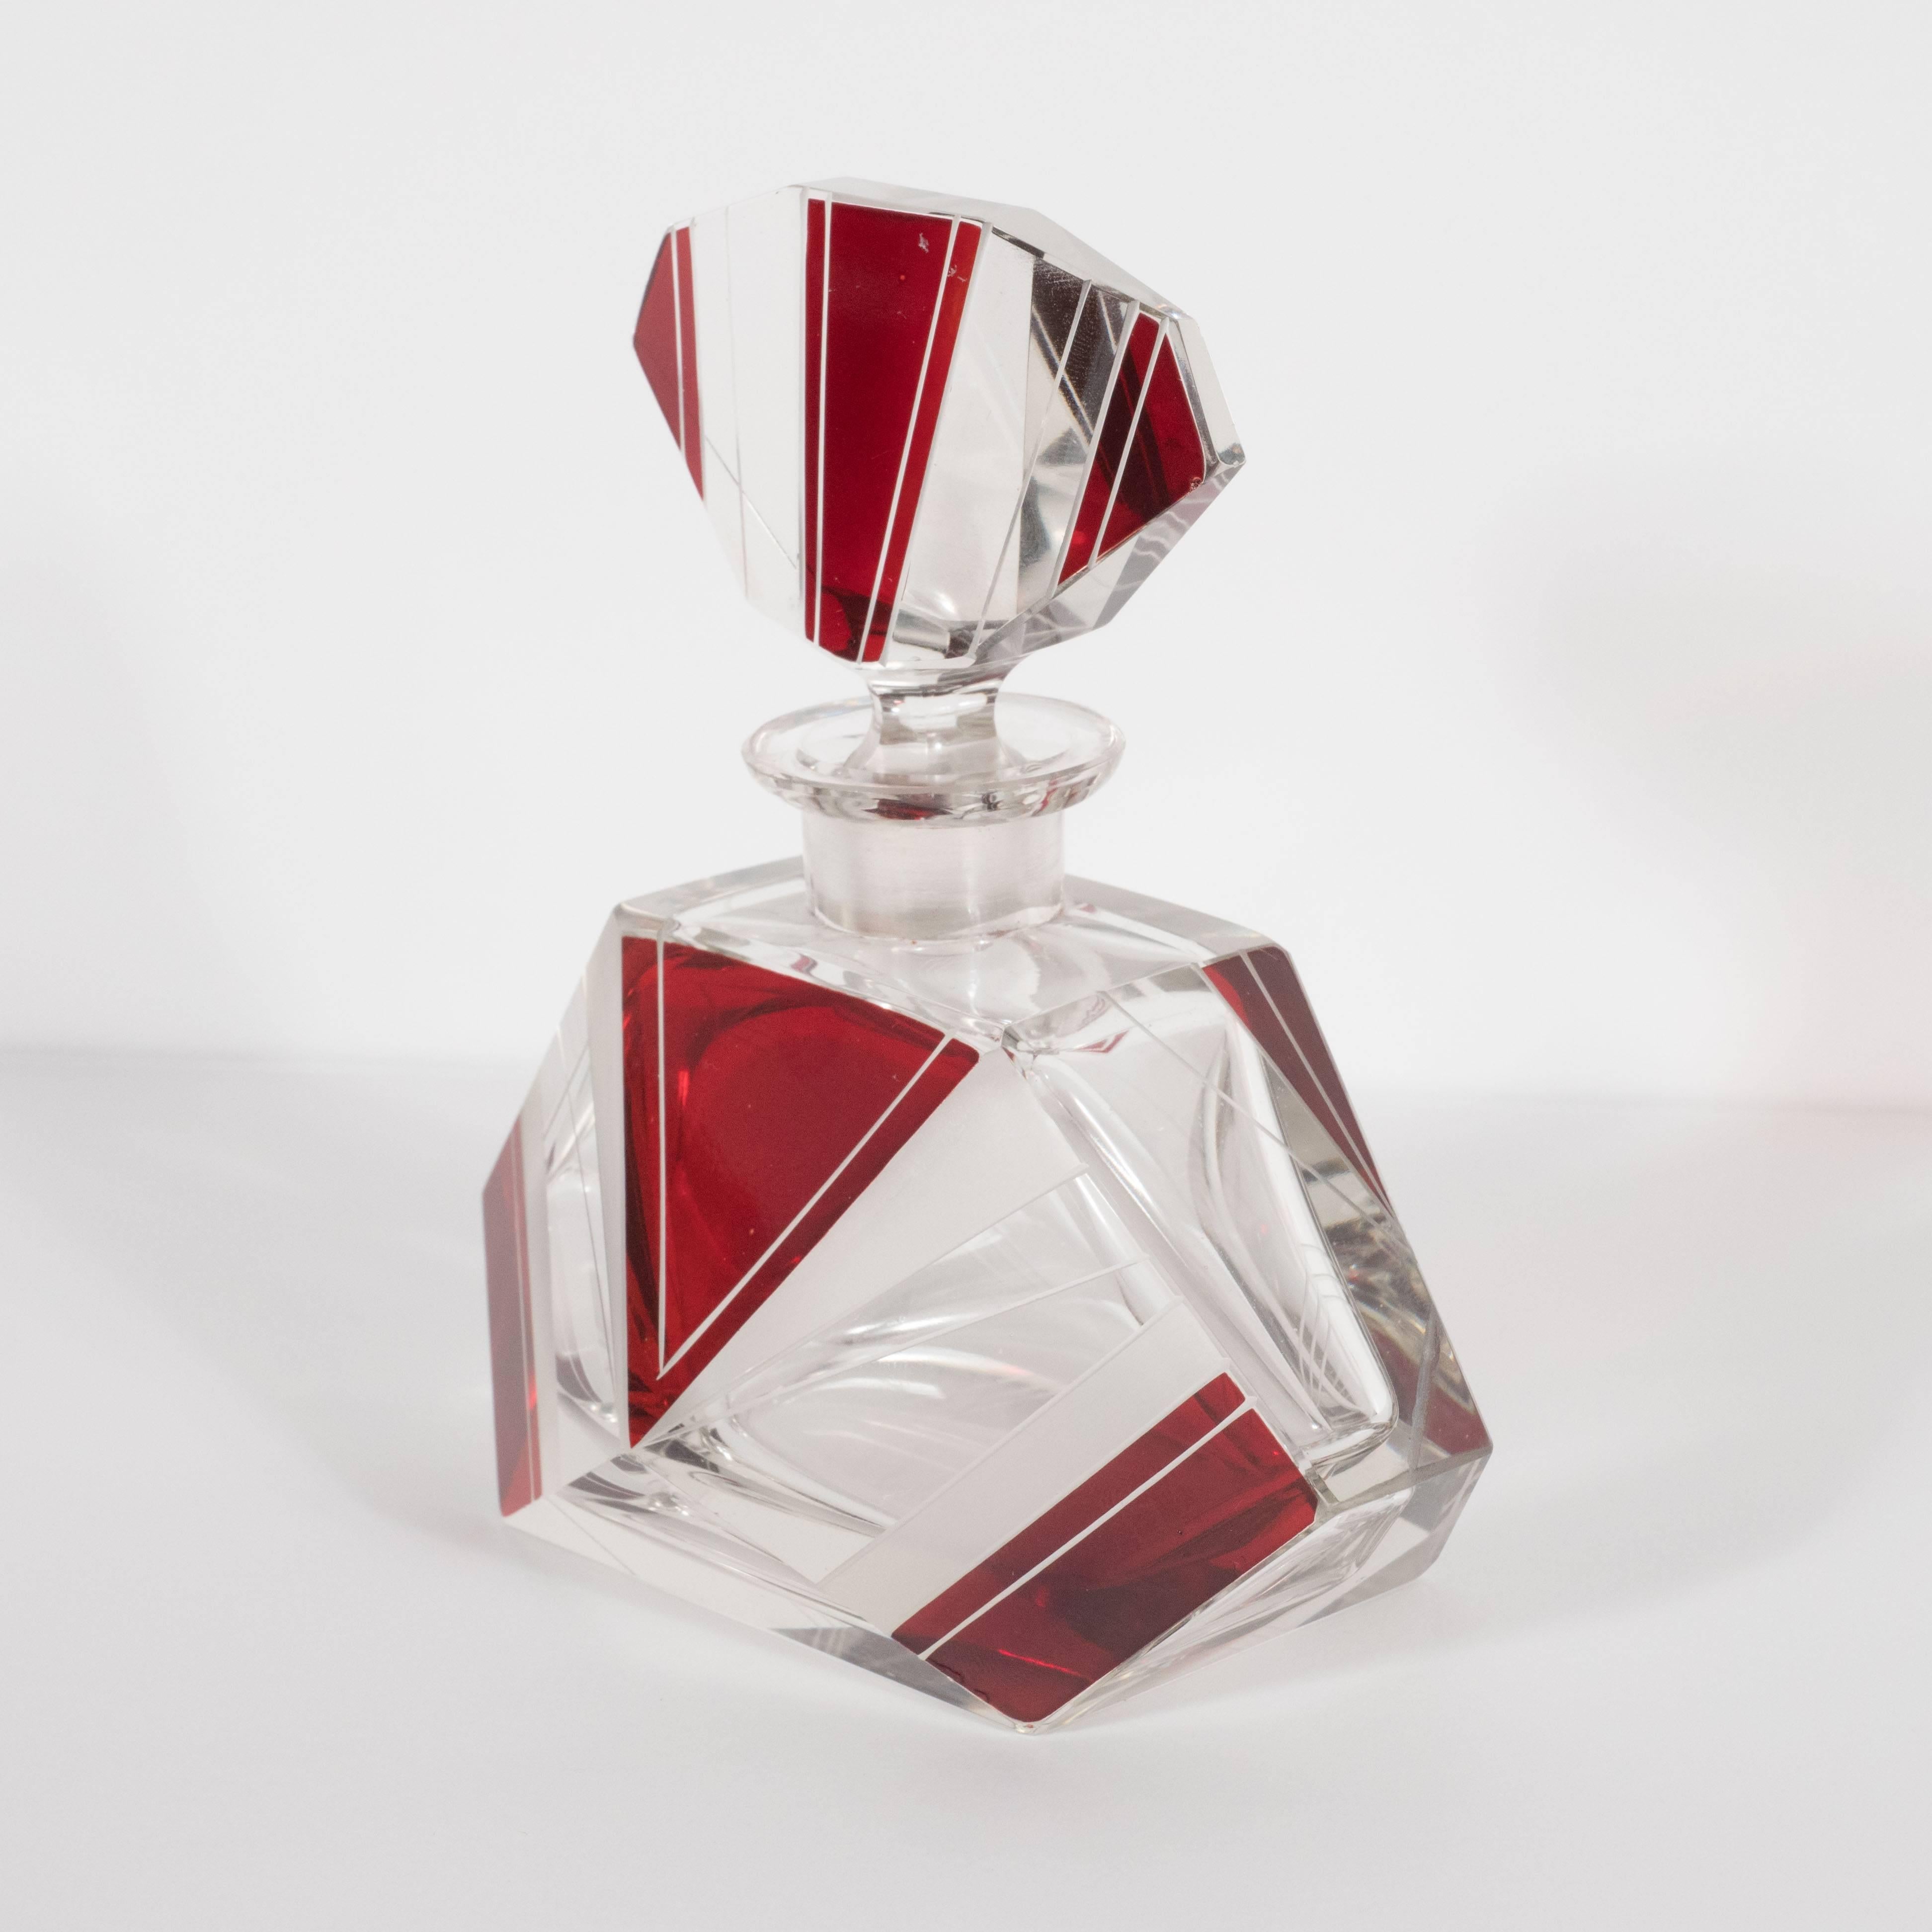 This refined cubist Art Deco perfume bottle was realized in the Czech Republic- a country renowned for its superlative glass products during this period. This piece, with its highly considered details and excellent craftsmanship, helps to explain